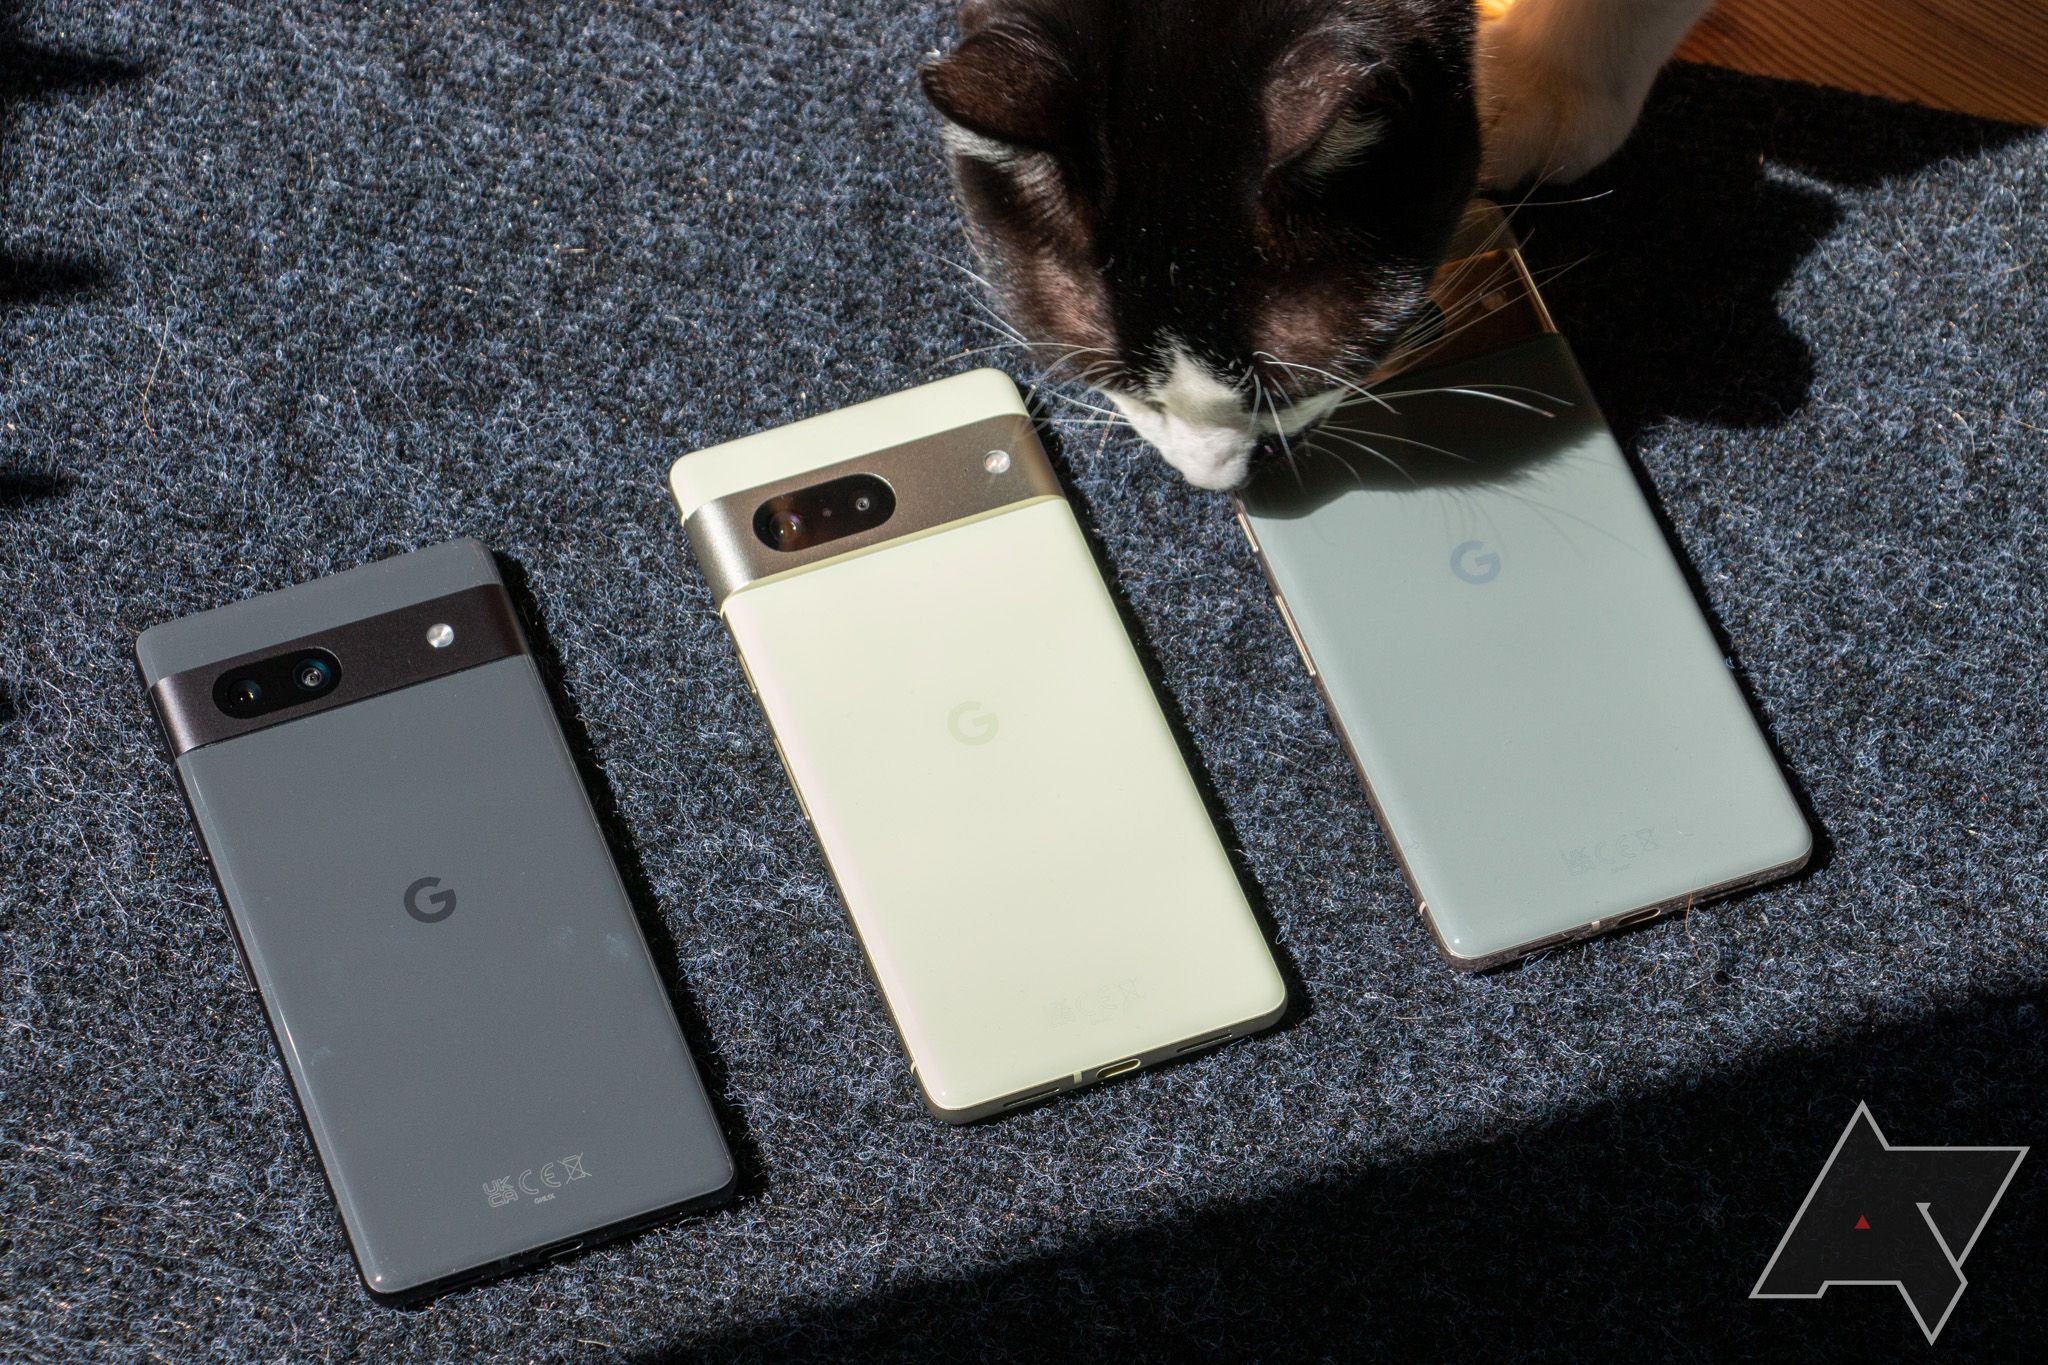 Three Google Pixel 7 series phones next to each other with a cat smelling one of them